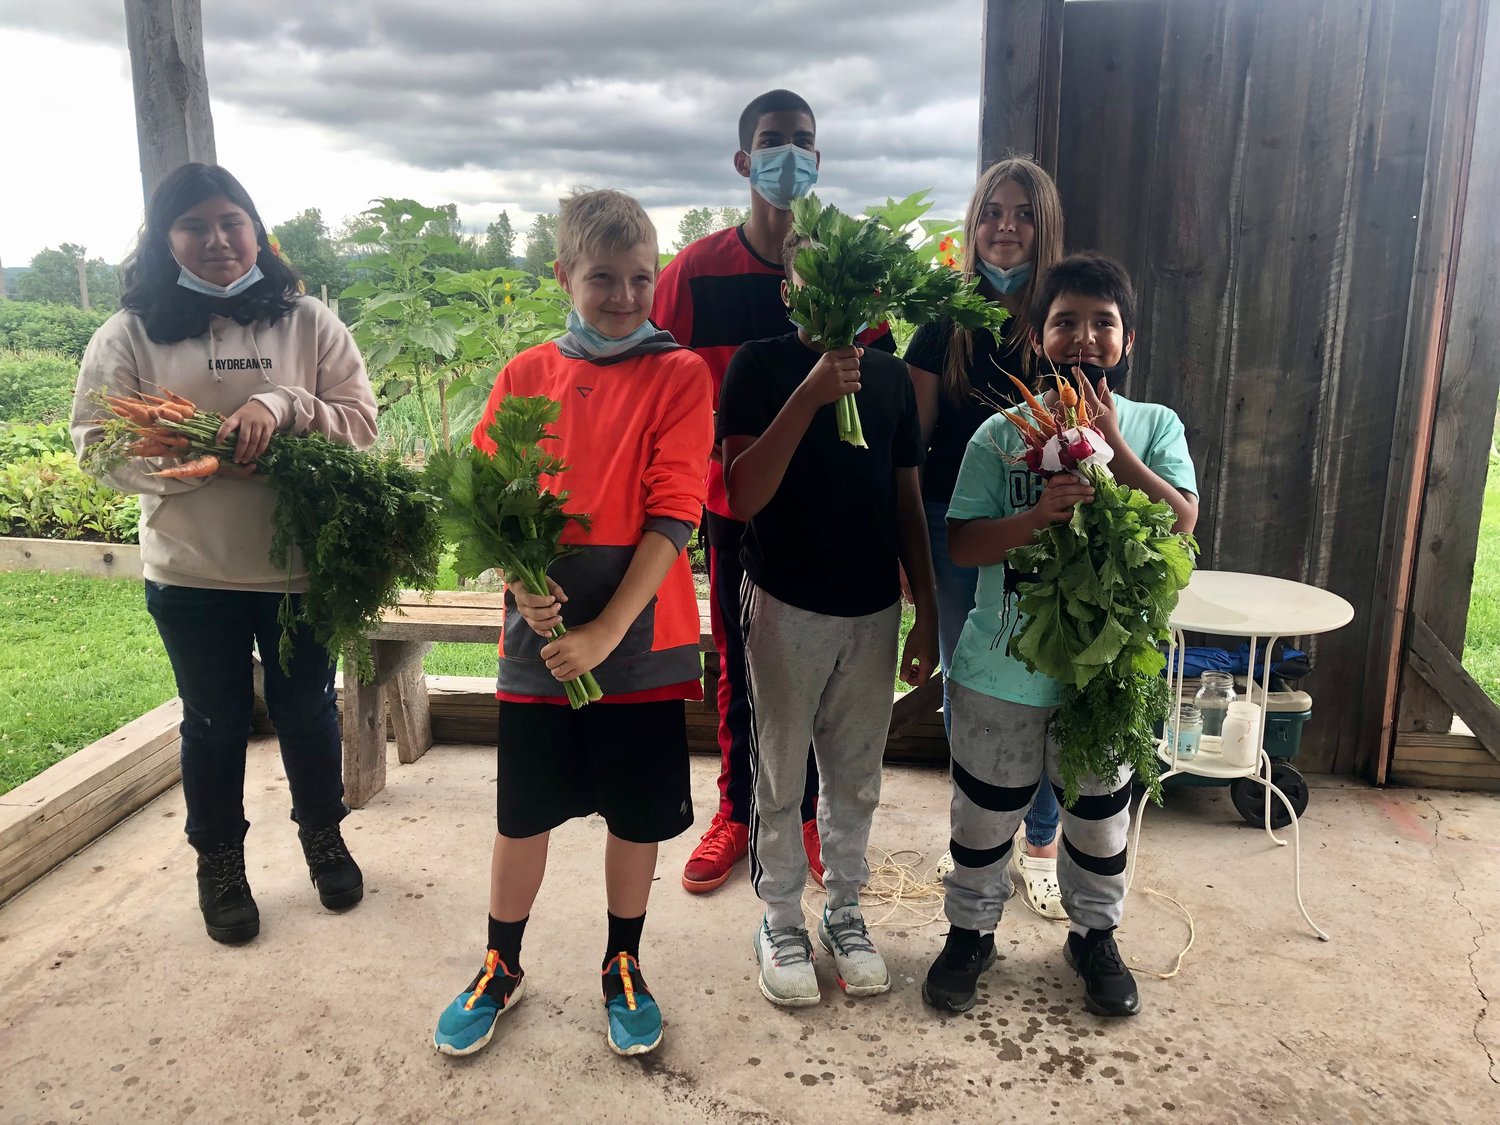 Students from the Liberty Partnership Program show off their harvest, which they cooked into a farm-to-table lunch with SUNY Sullivan’s culinary instructors.